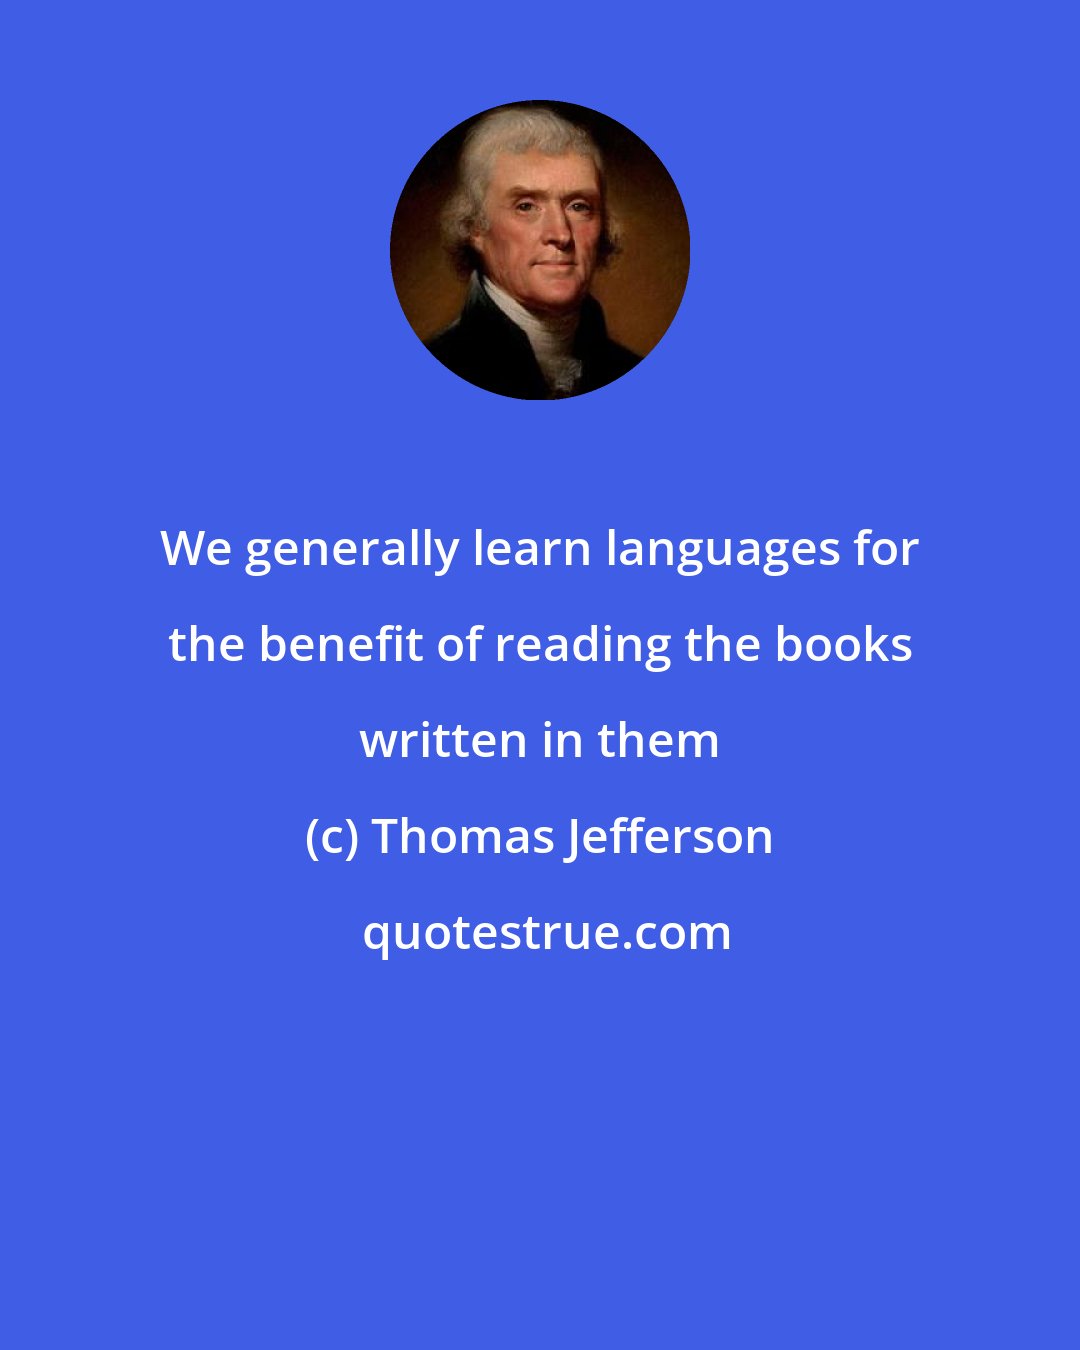 Thomas Jefferson: We generally learn languages for the benefit of reading the books written in them